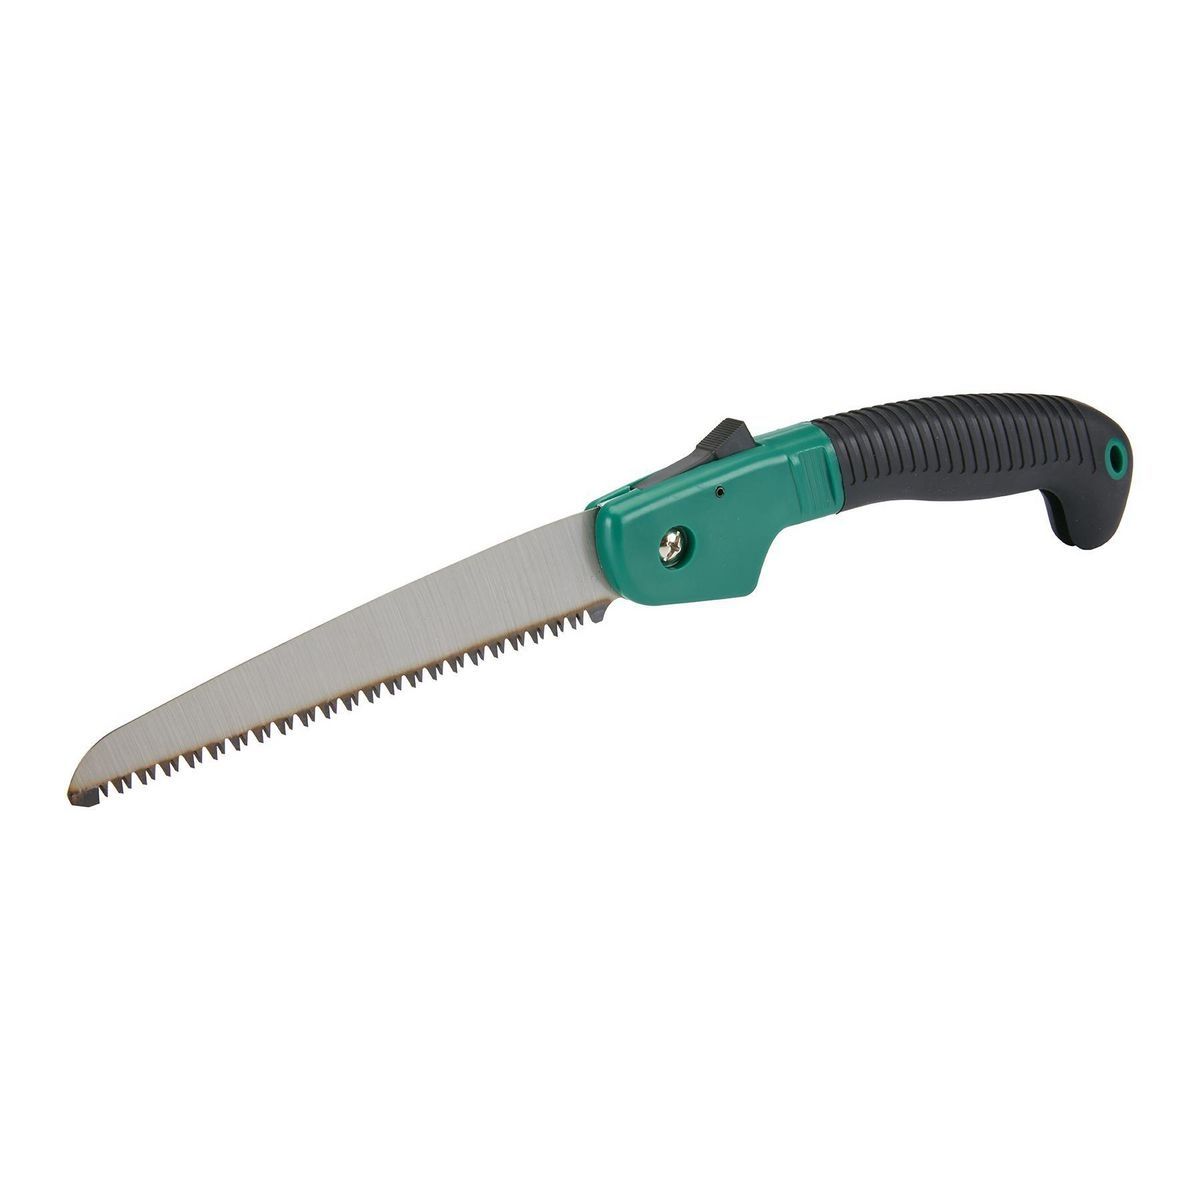 ONE STOP GARDENS 8 In. Folding Pruning Saw